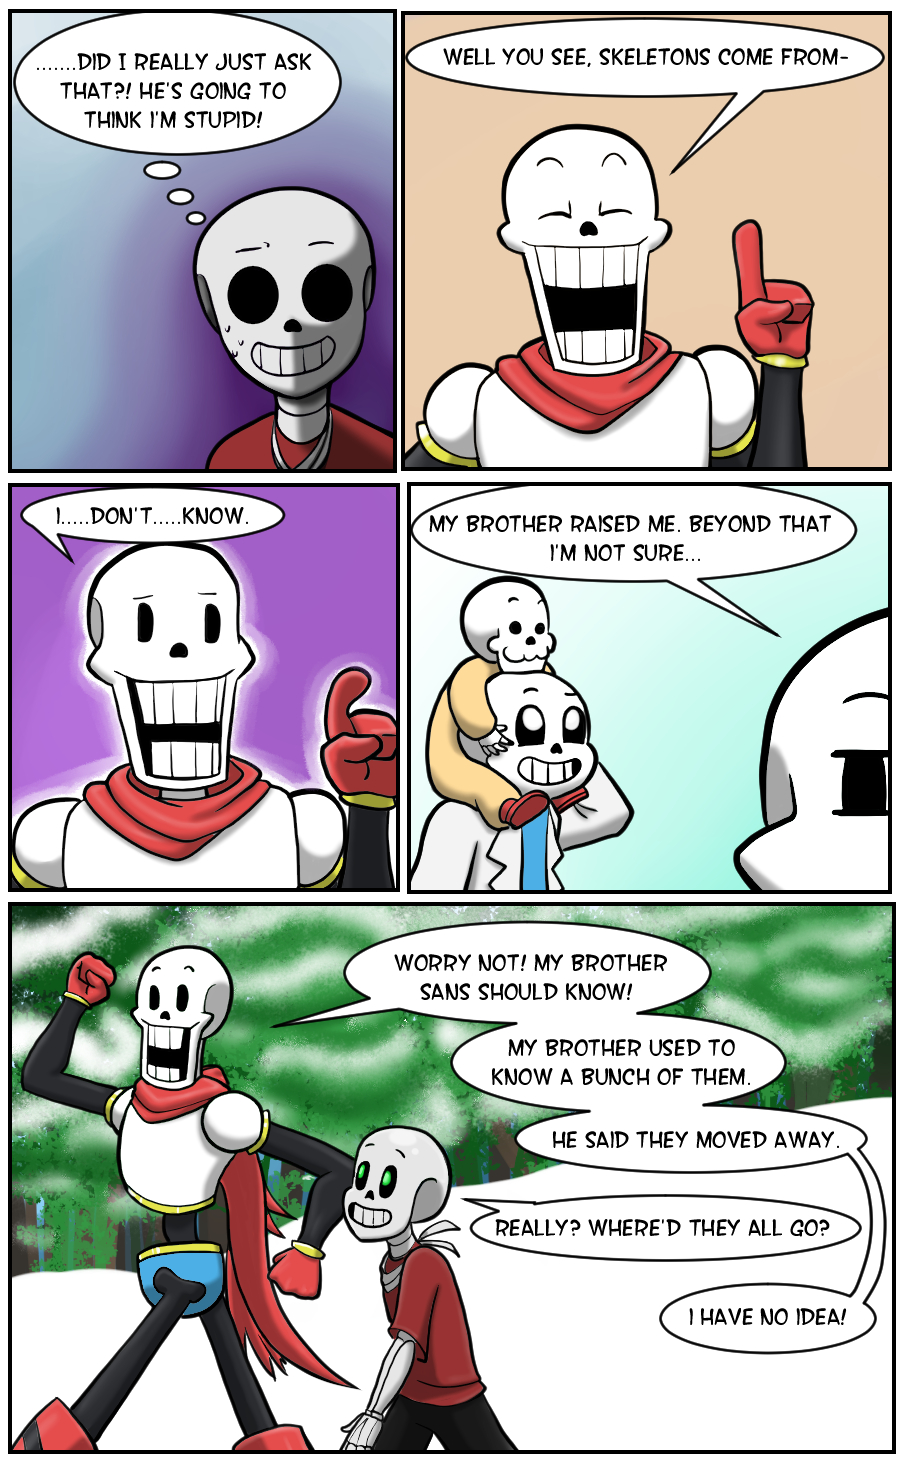 Undertale green Chapter 2 Page 10 by FlamingReaperComic on DeviantArt